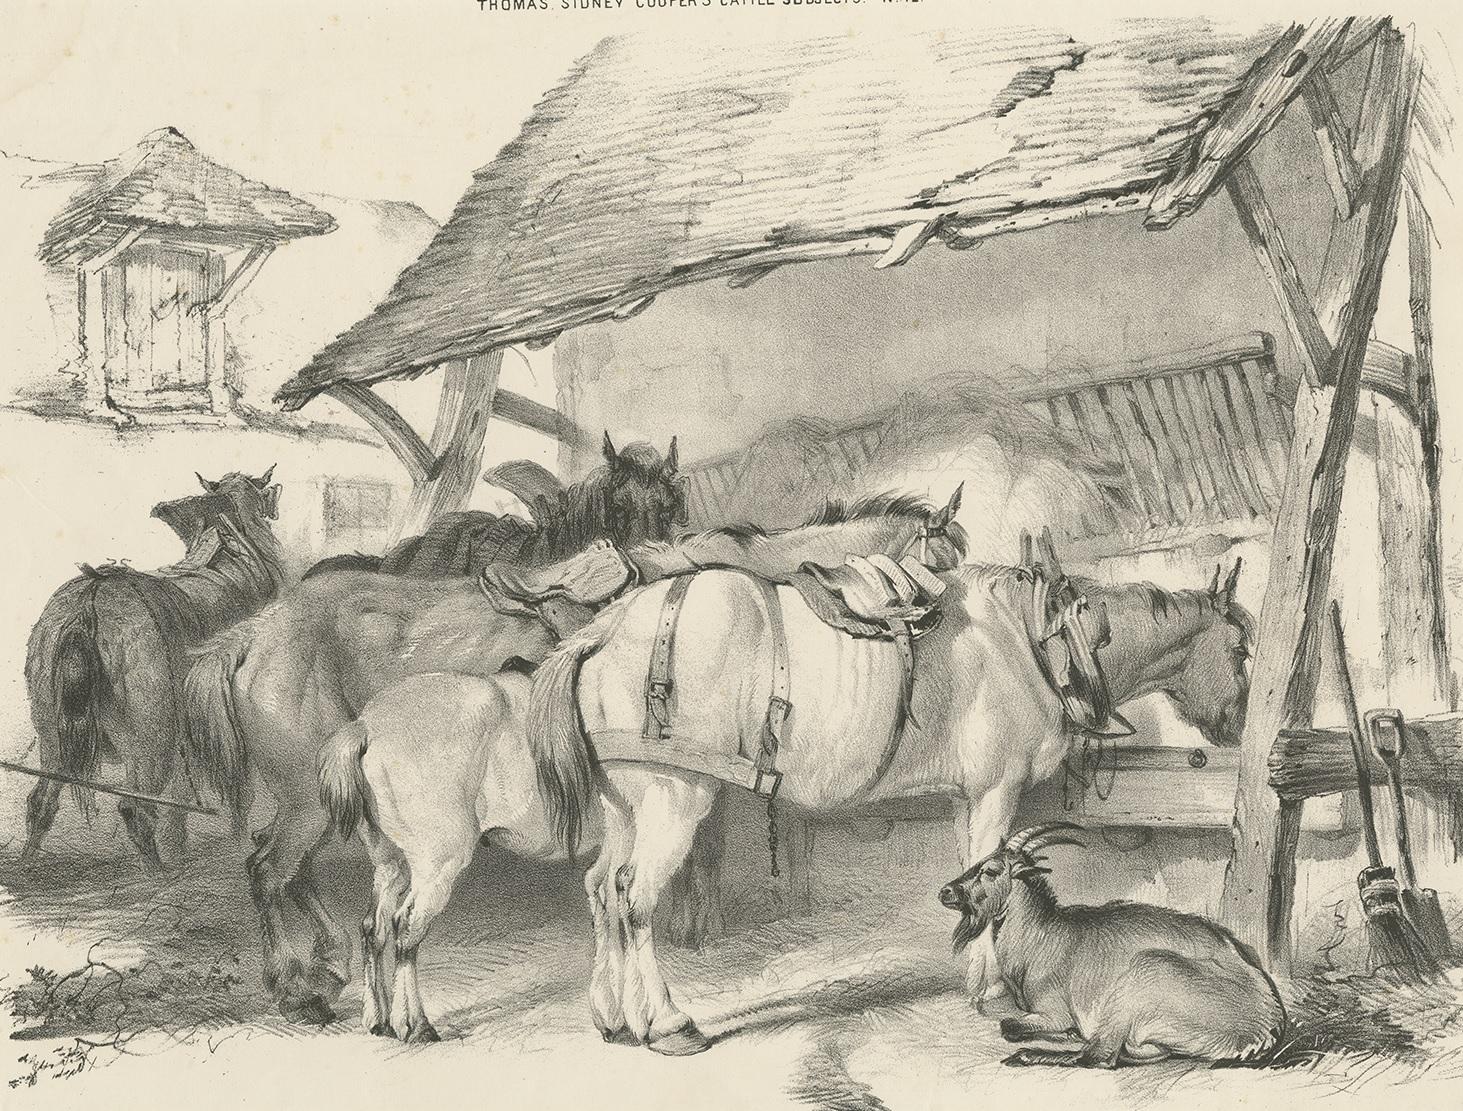 The antique print featuring horses and a goat originates from 'Cattle Subjects' by Thomas Sidney Cooper, an esteemed English landscape painter renowned for his captivating depictions of cattle and farm animals. Published in 1839, this work by Cooper